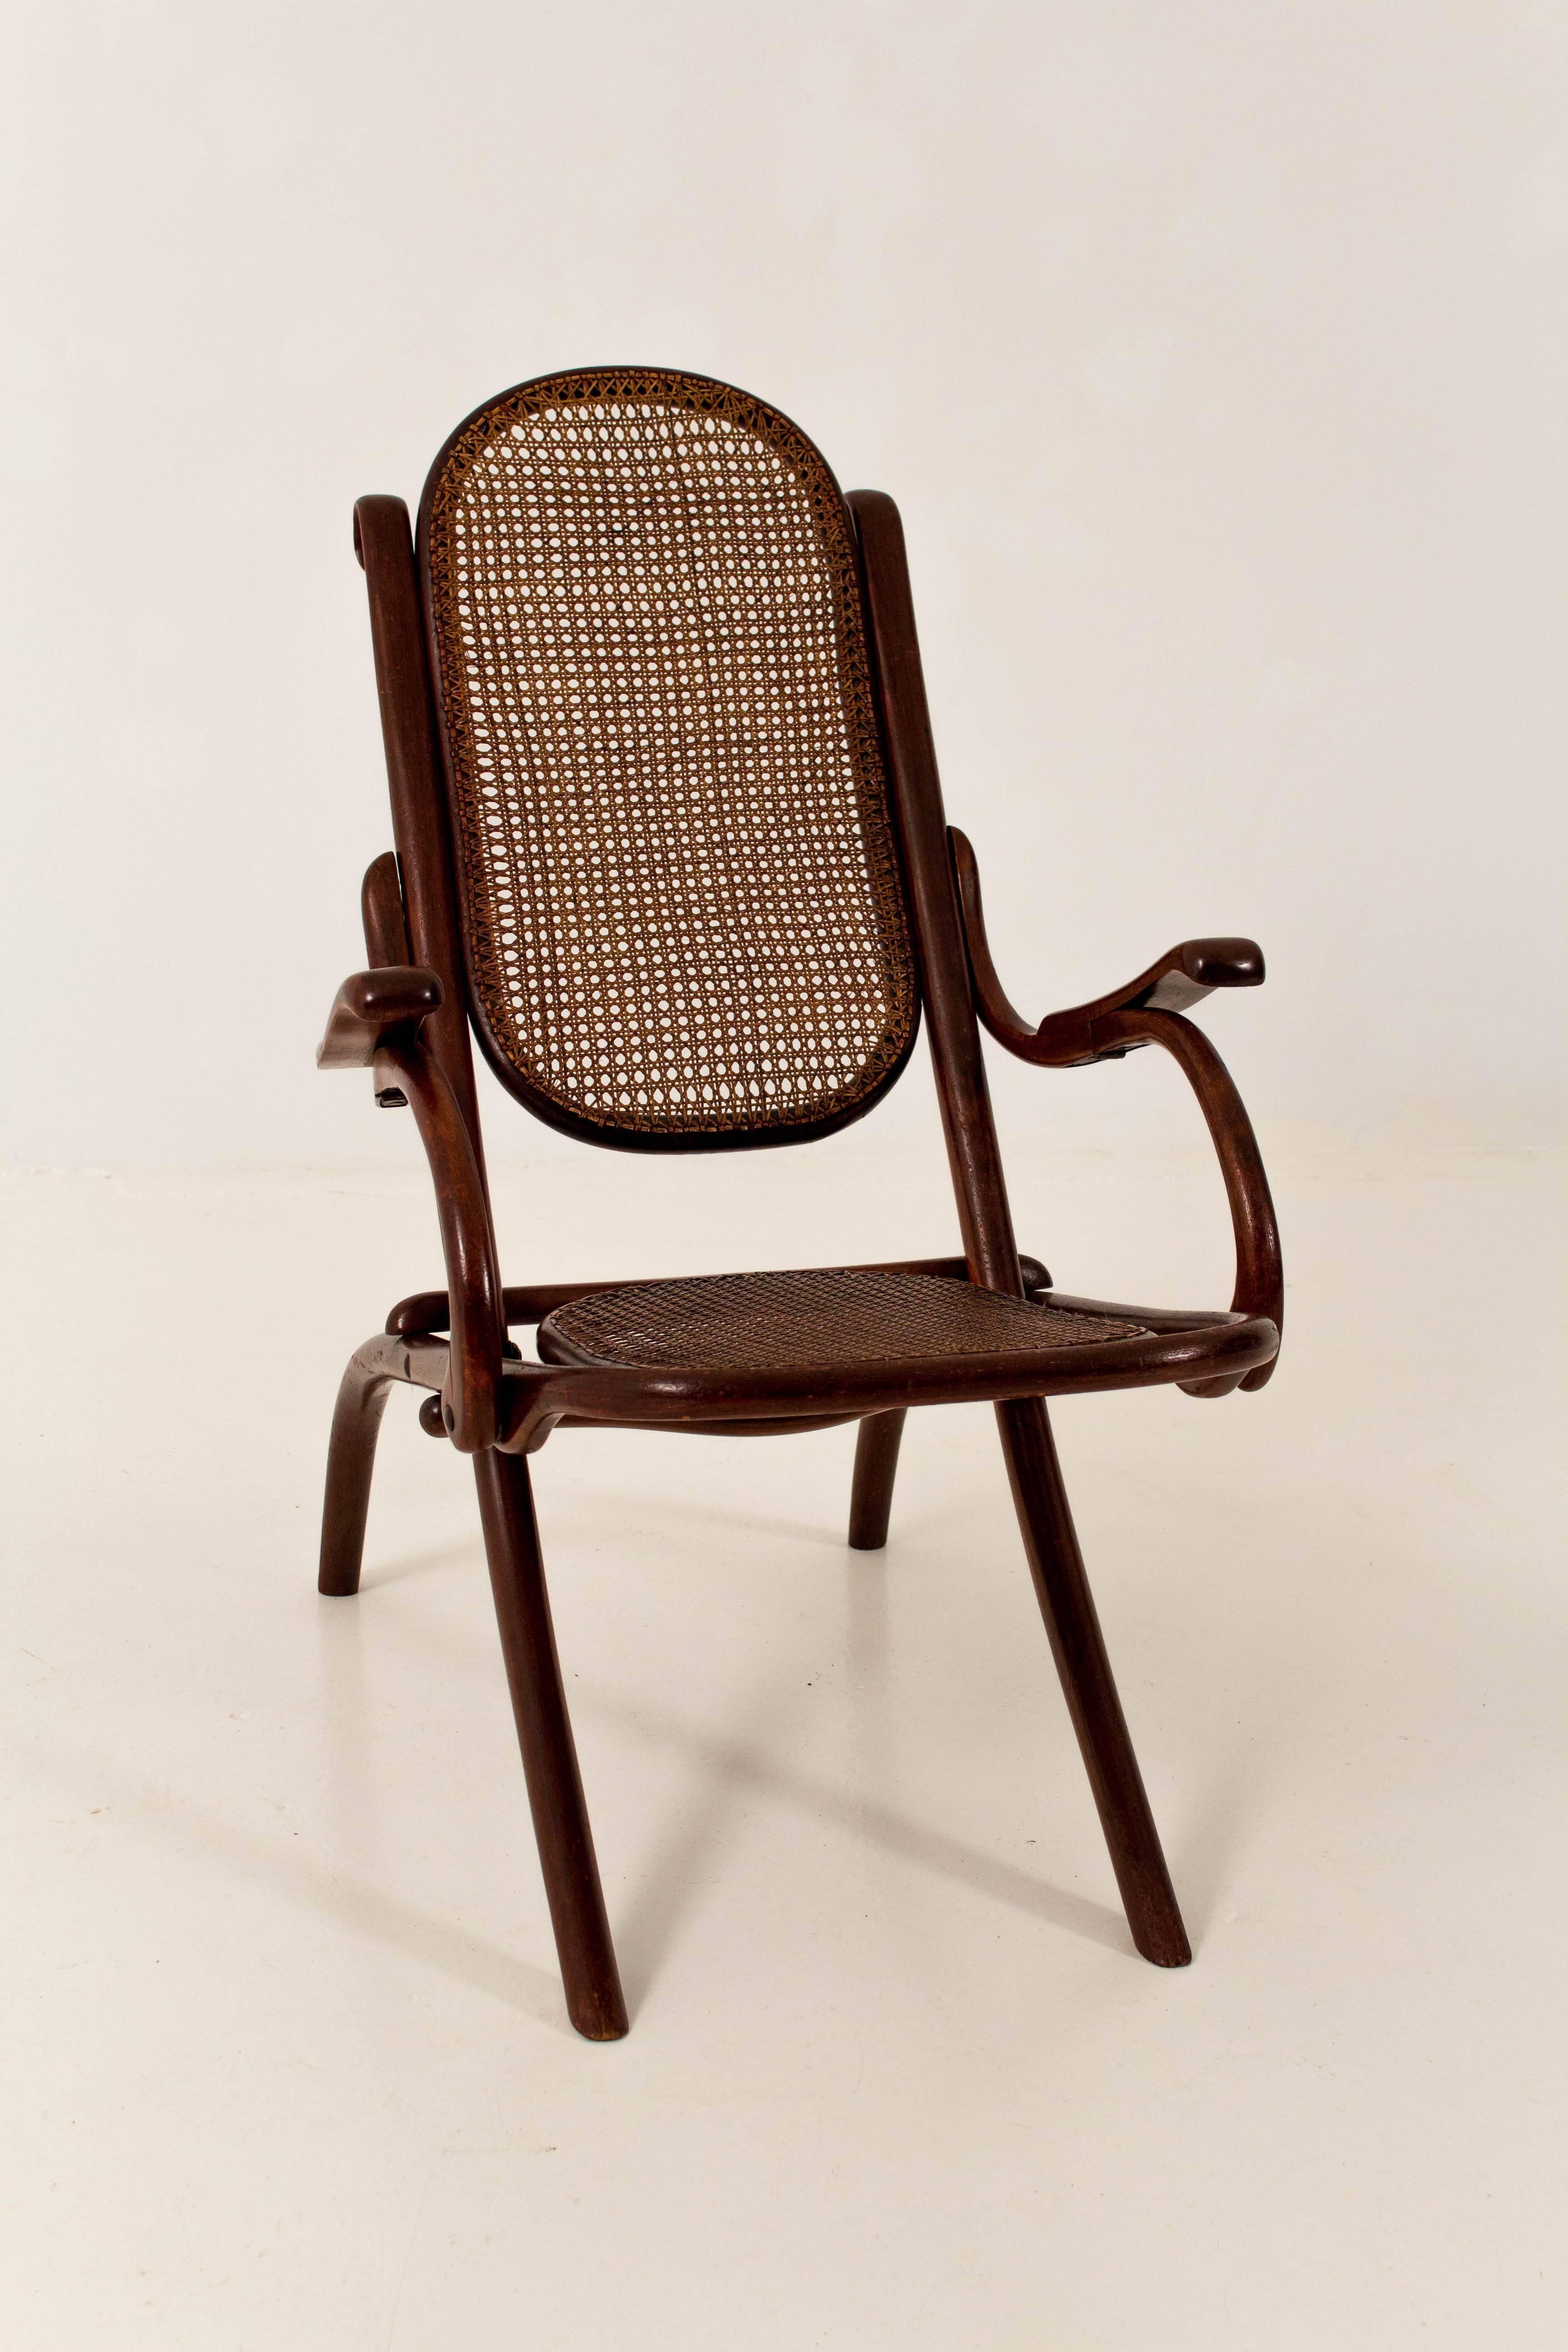 Thonet fold chair Austria 1890s.
Mahogany stained beechwood.
Original cane seating and back.
In good condition.